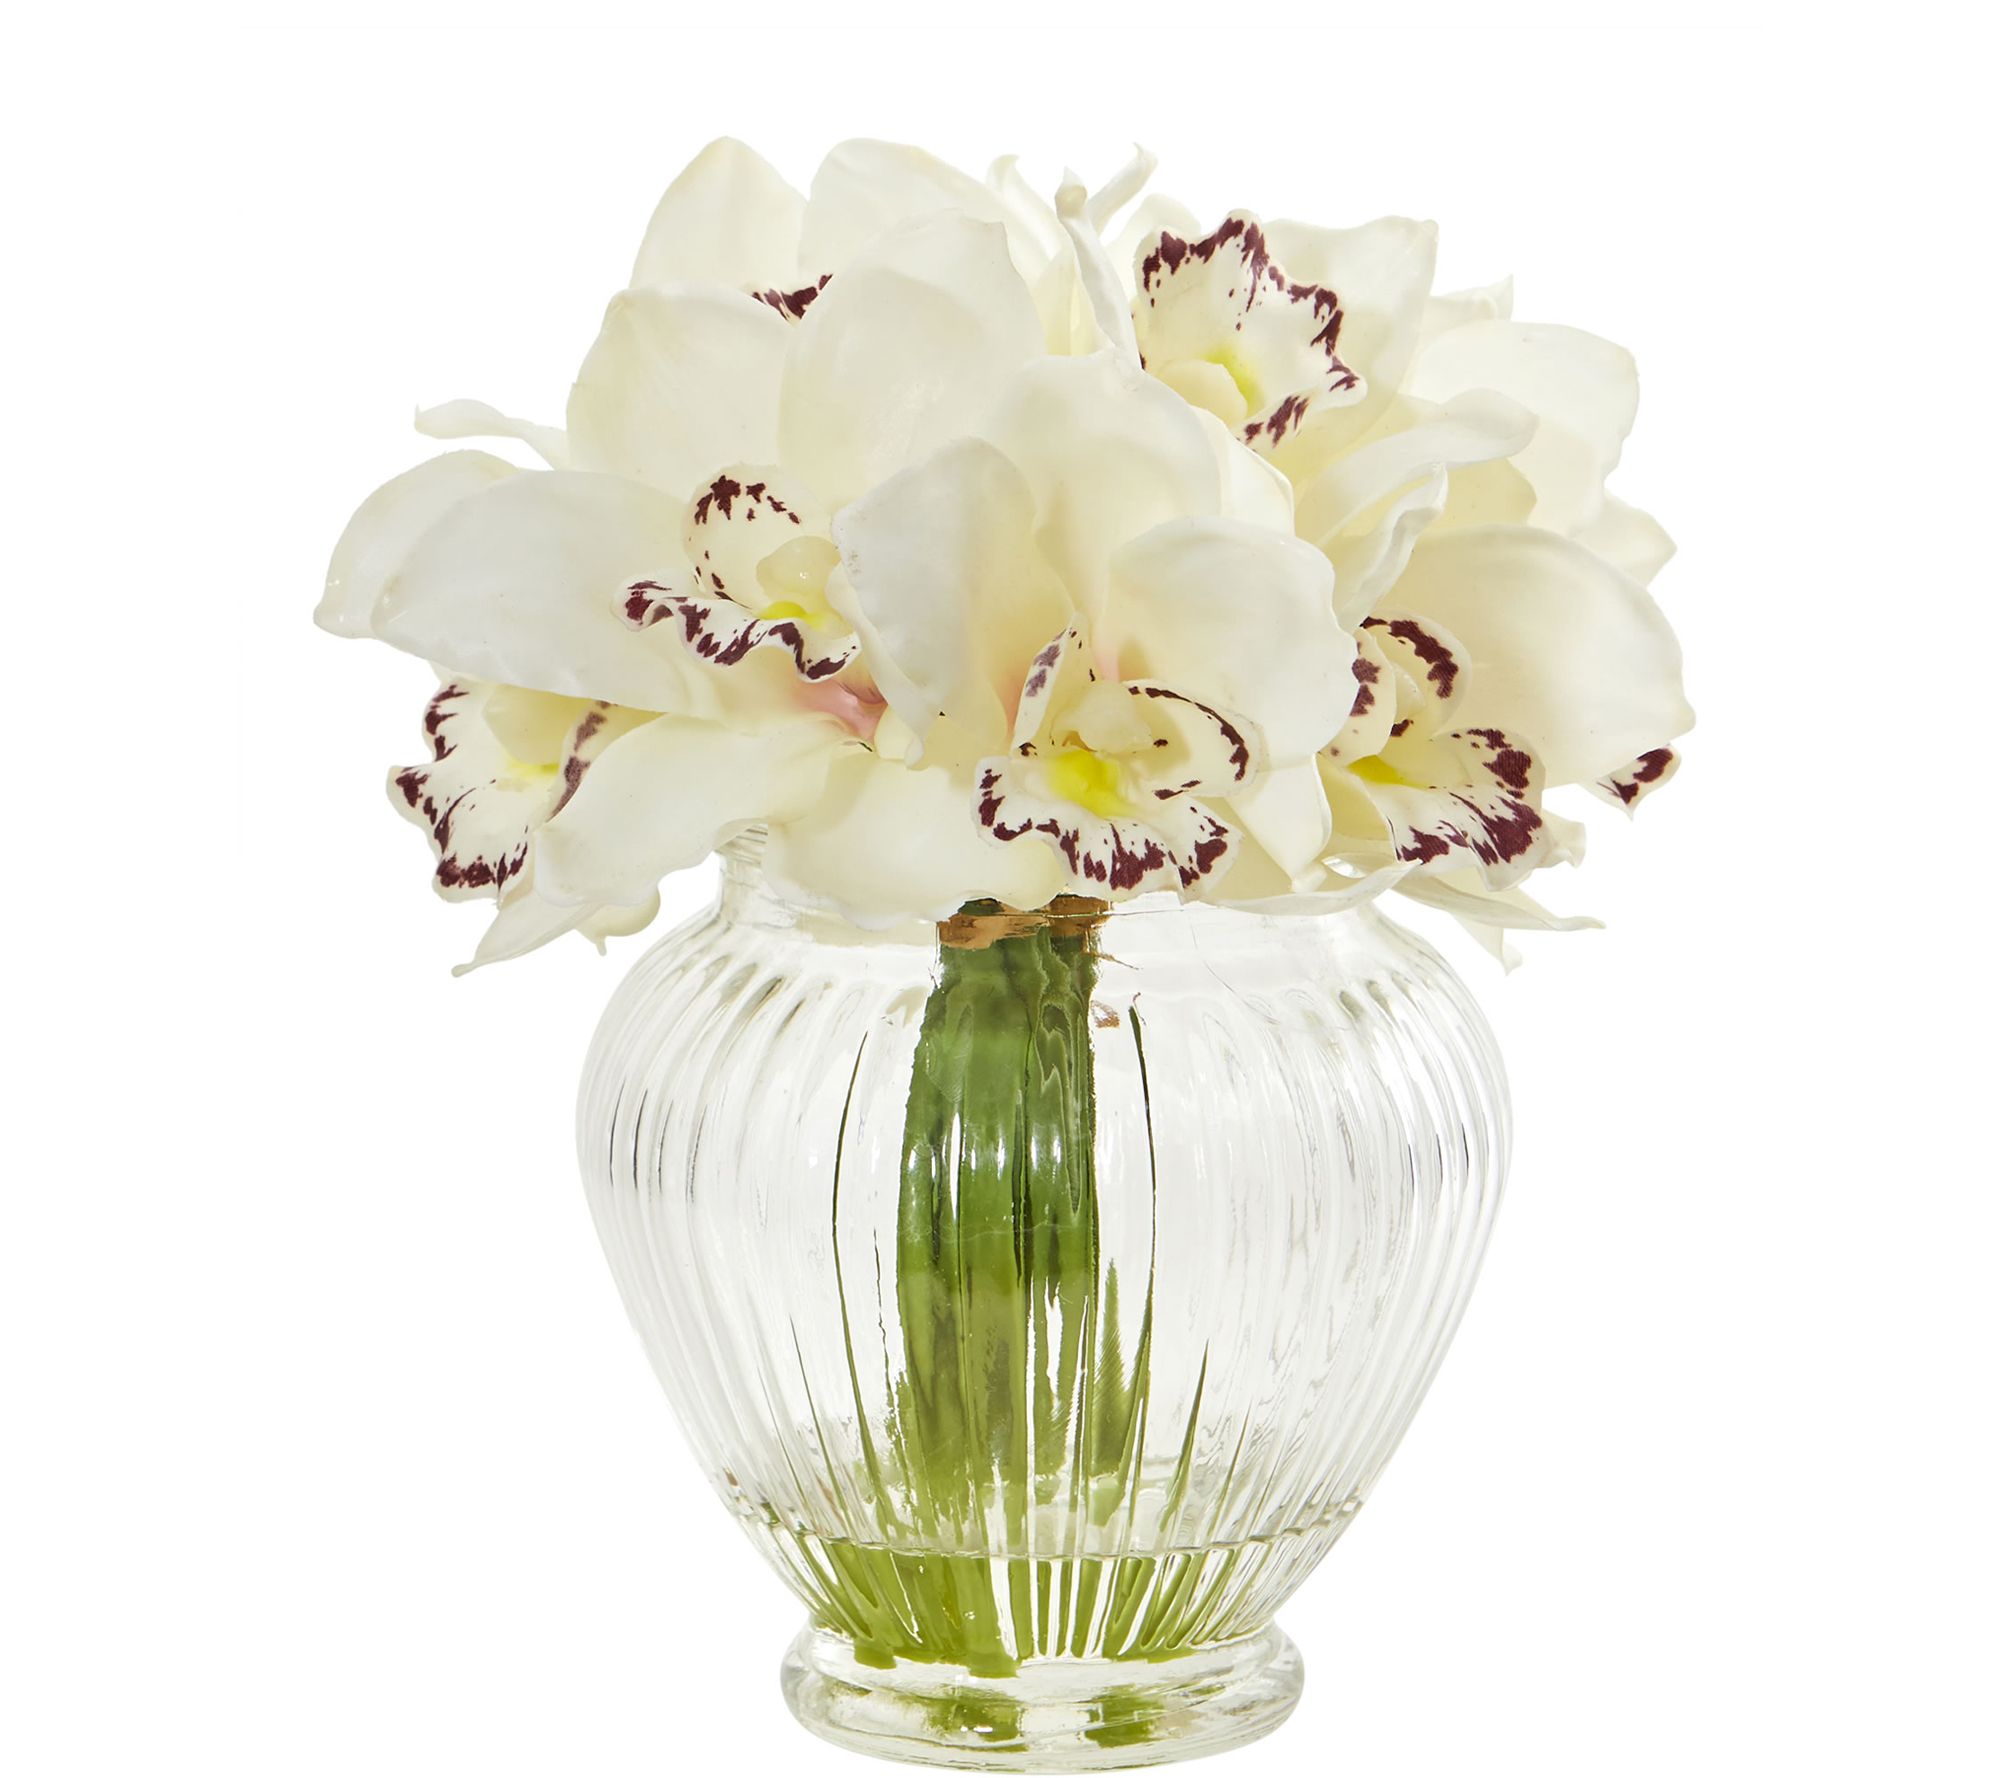 Cymbidium Orchid Arrangement In Vase By Nearlynatural